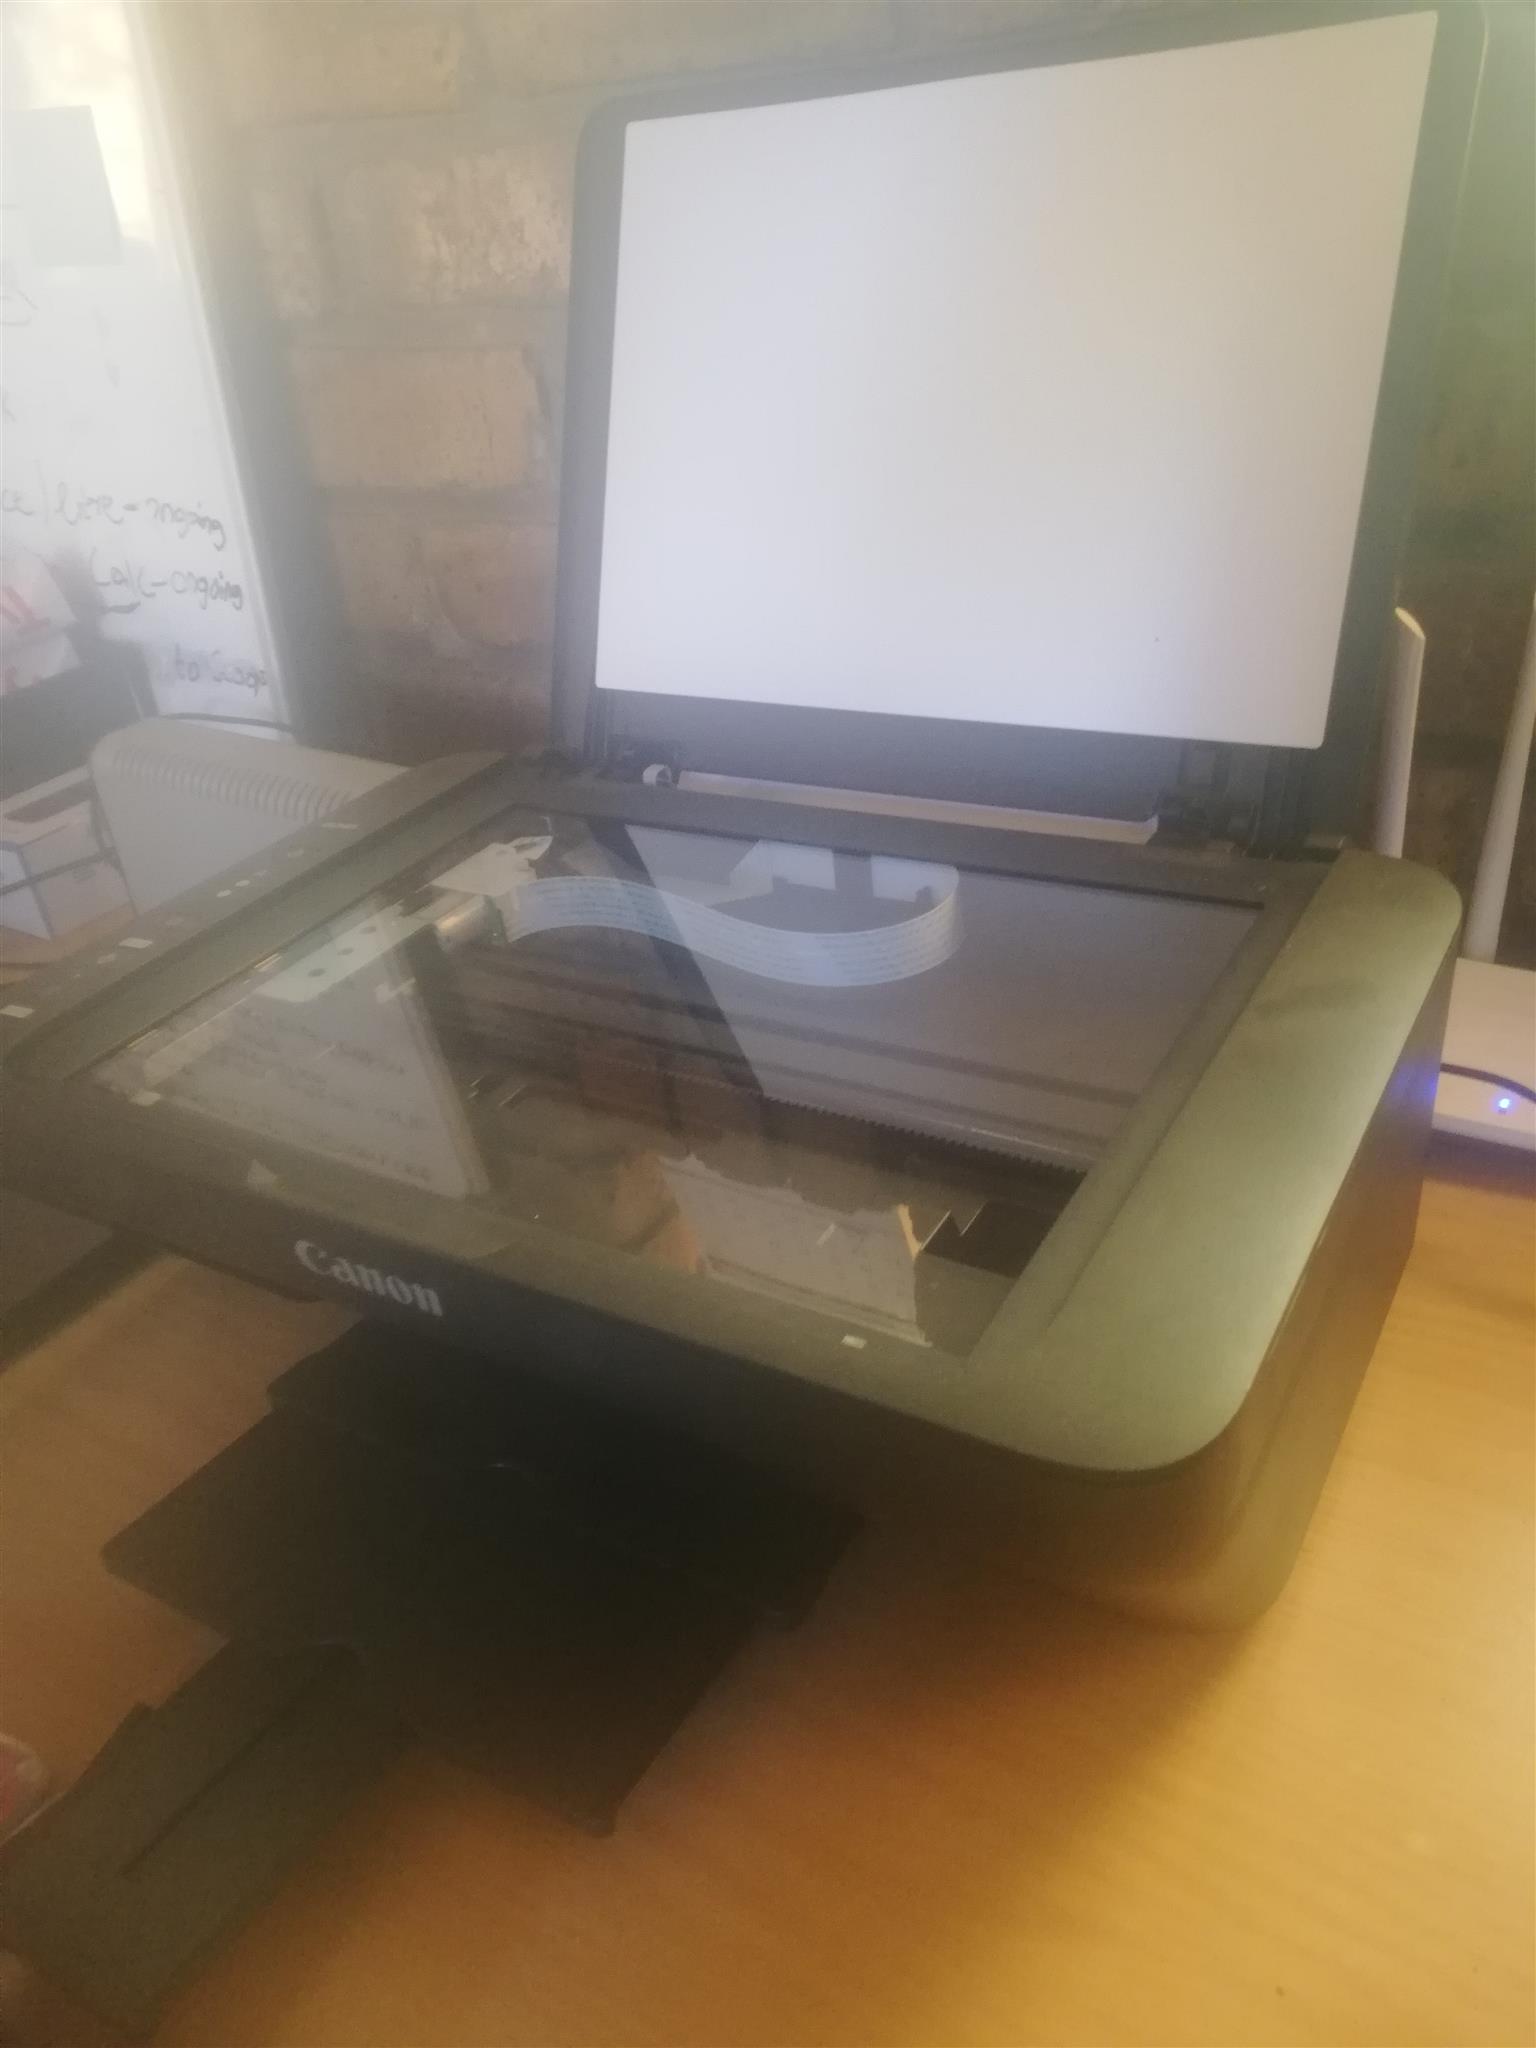 2 HP printers for sale 